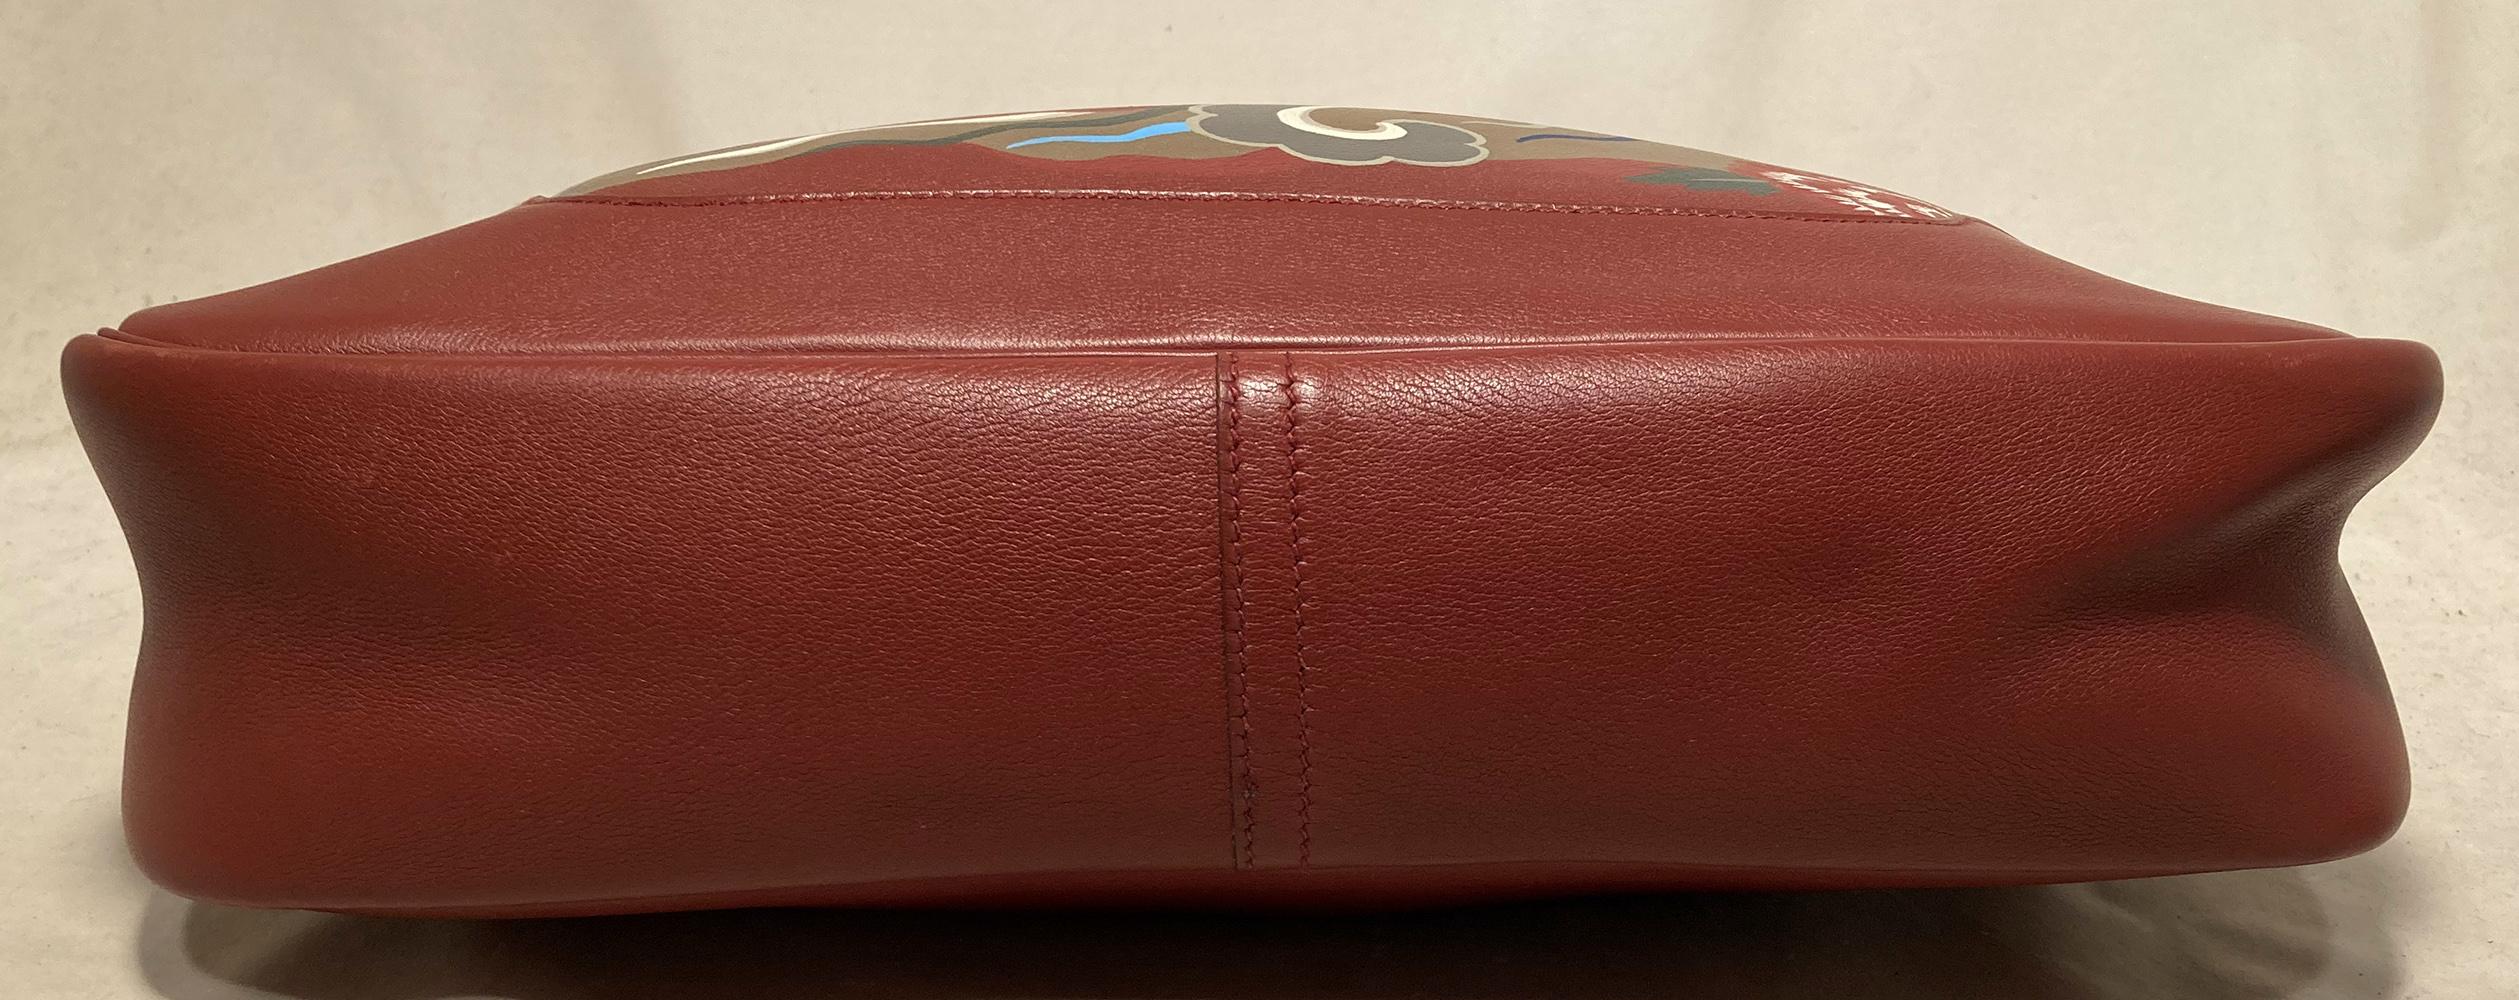 Brown Hermes Red Swift Leather Trim Bag Hand Painted